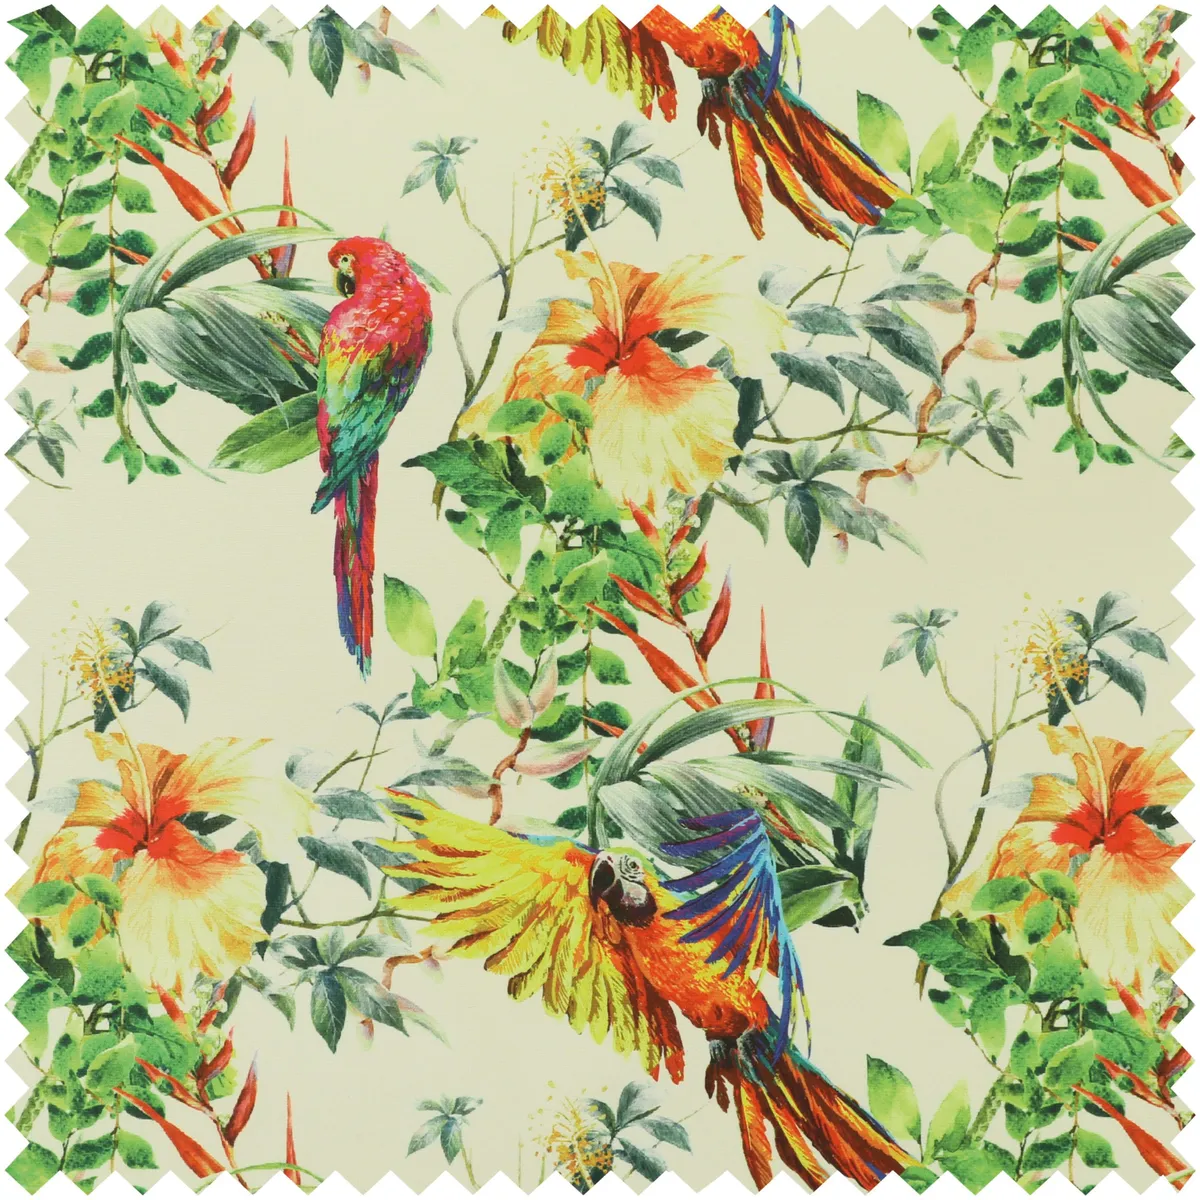 Freedom printed velvet fabric colourful parrot jungle pattern upholstery fabric, £17.99 per metre, Yorkshire Fabric Shop